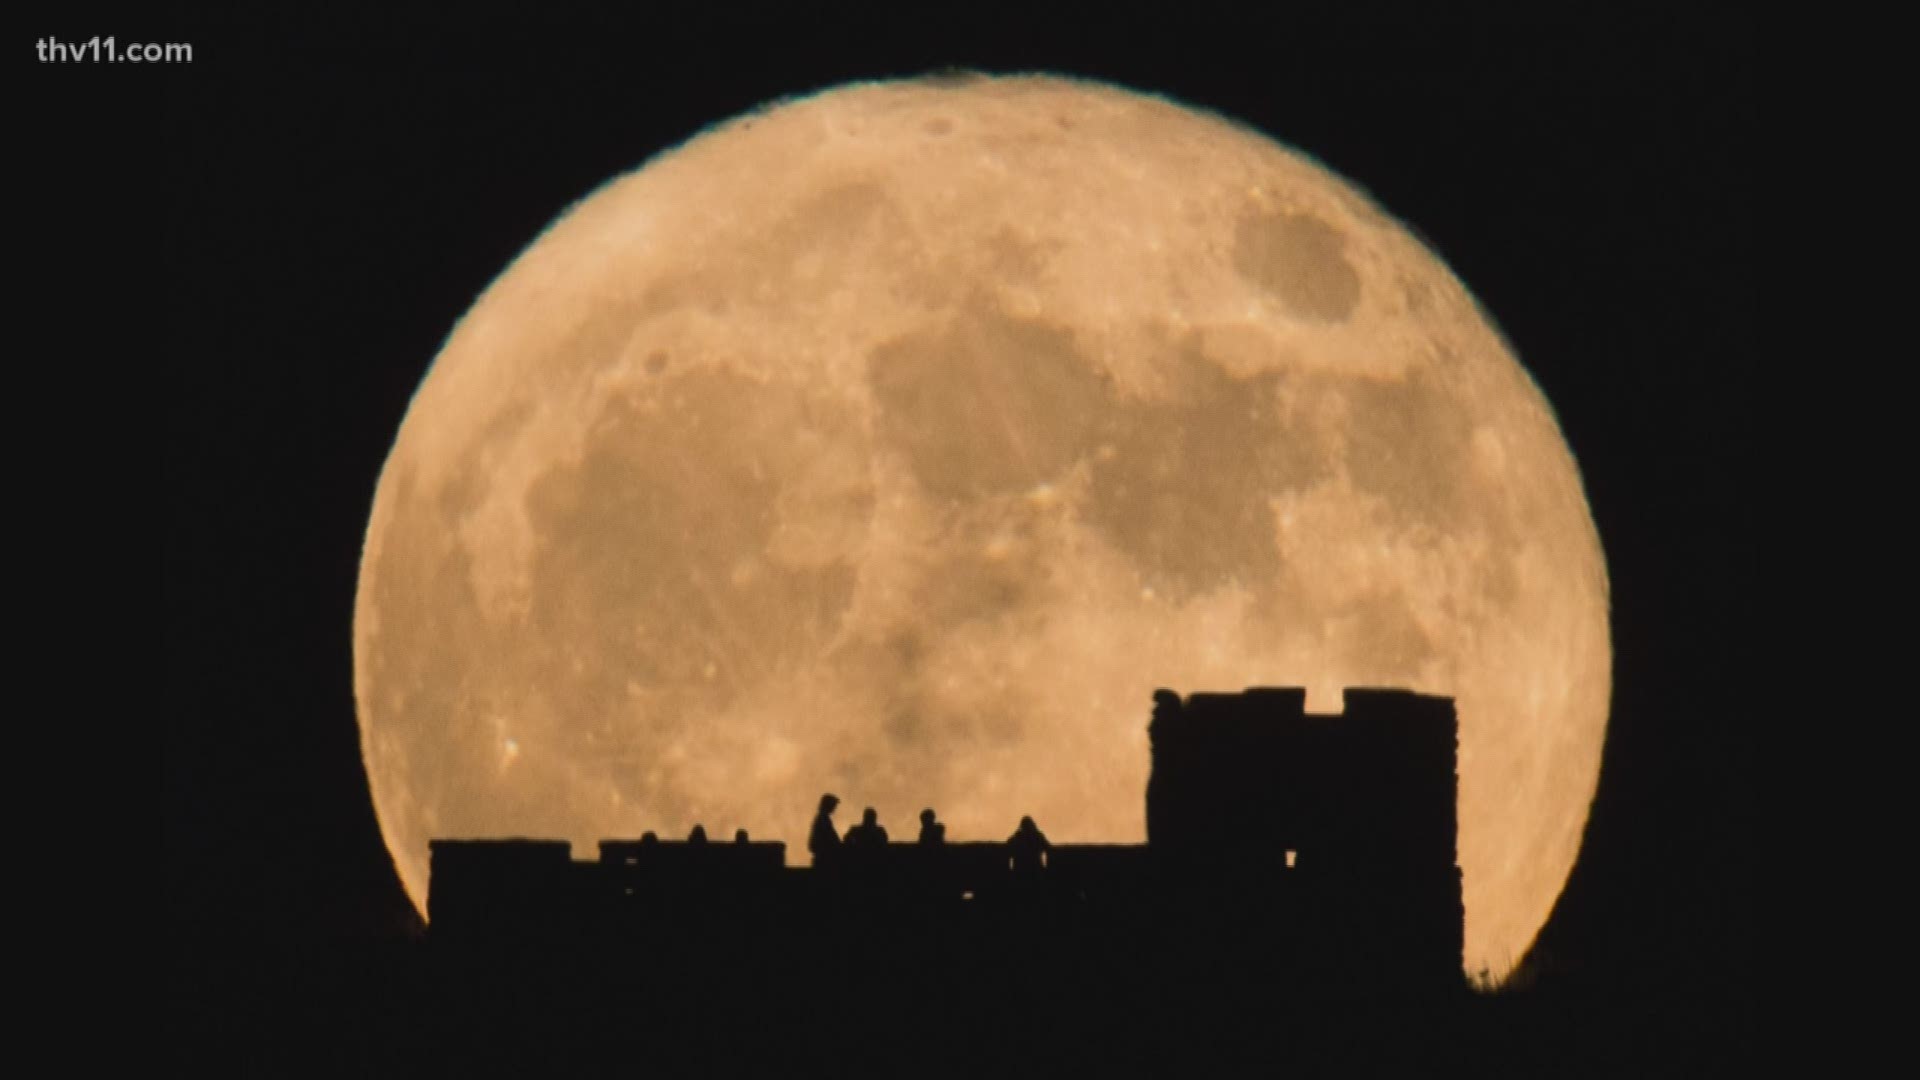 If you love star gazing, set your alarms. Tomorrow morning, you'll see the largest Supermoon of 2019!